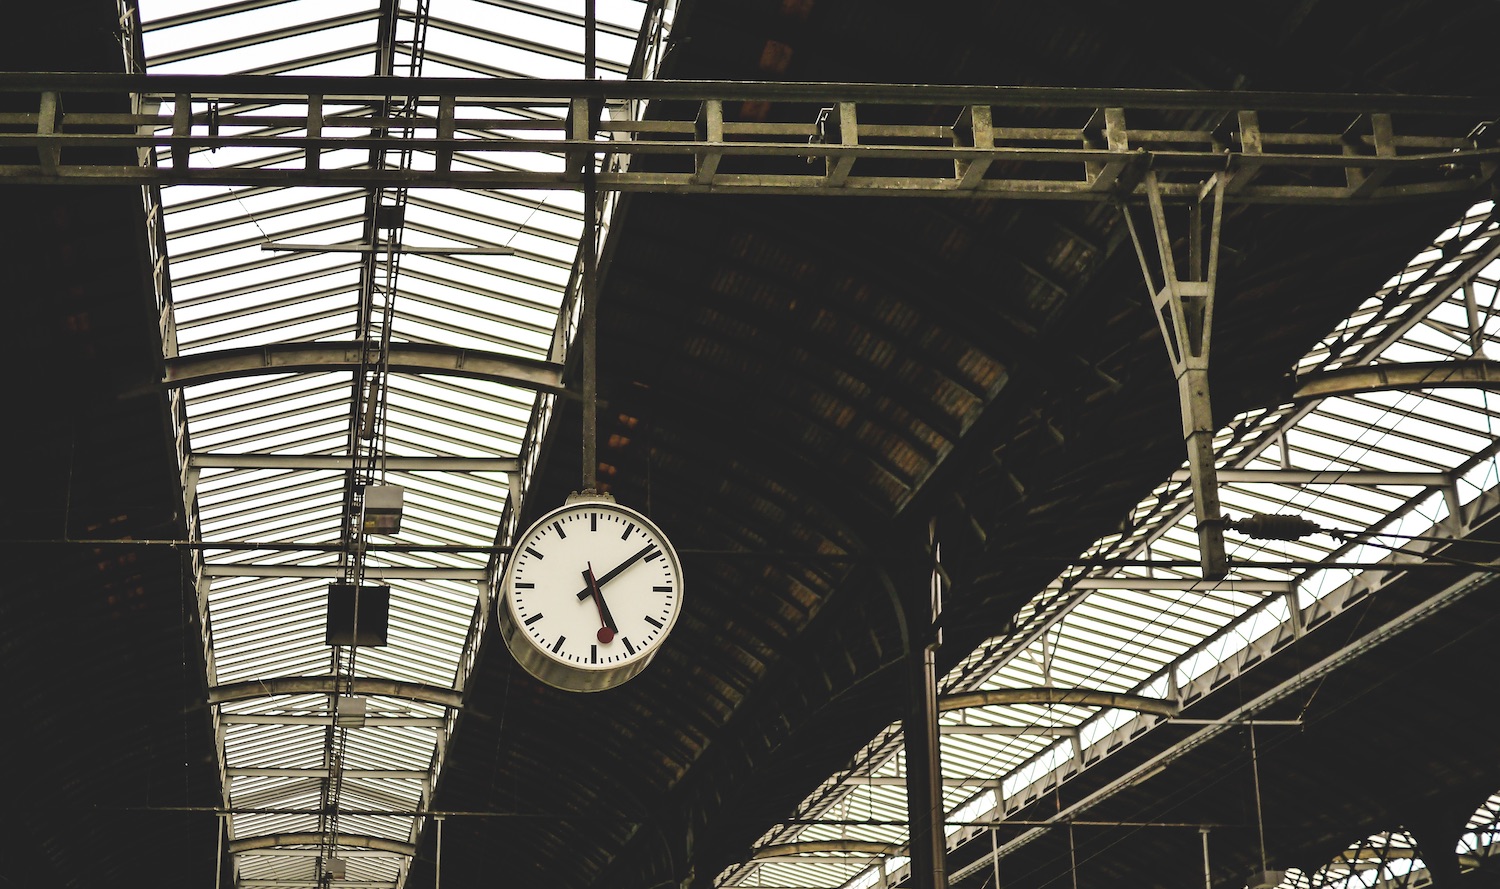 WordPress Contributors Propose Shorter, Time-based Release Cycles